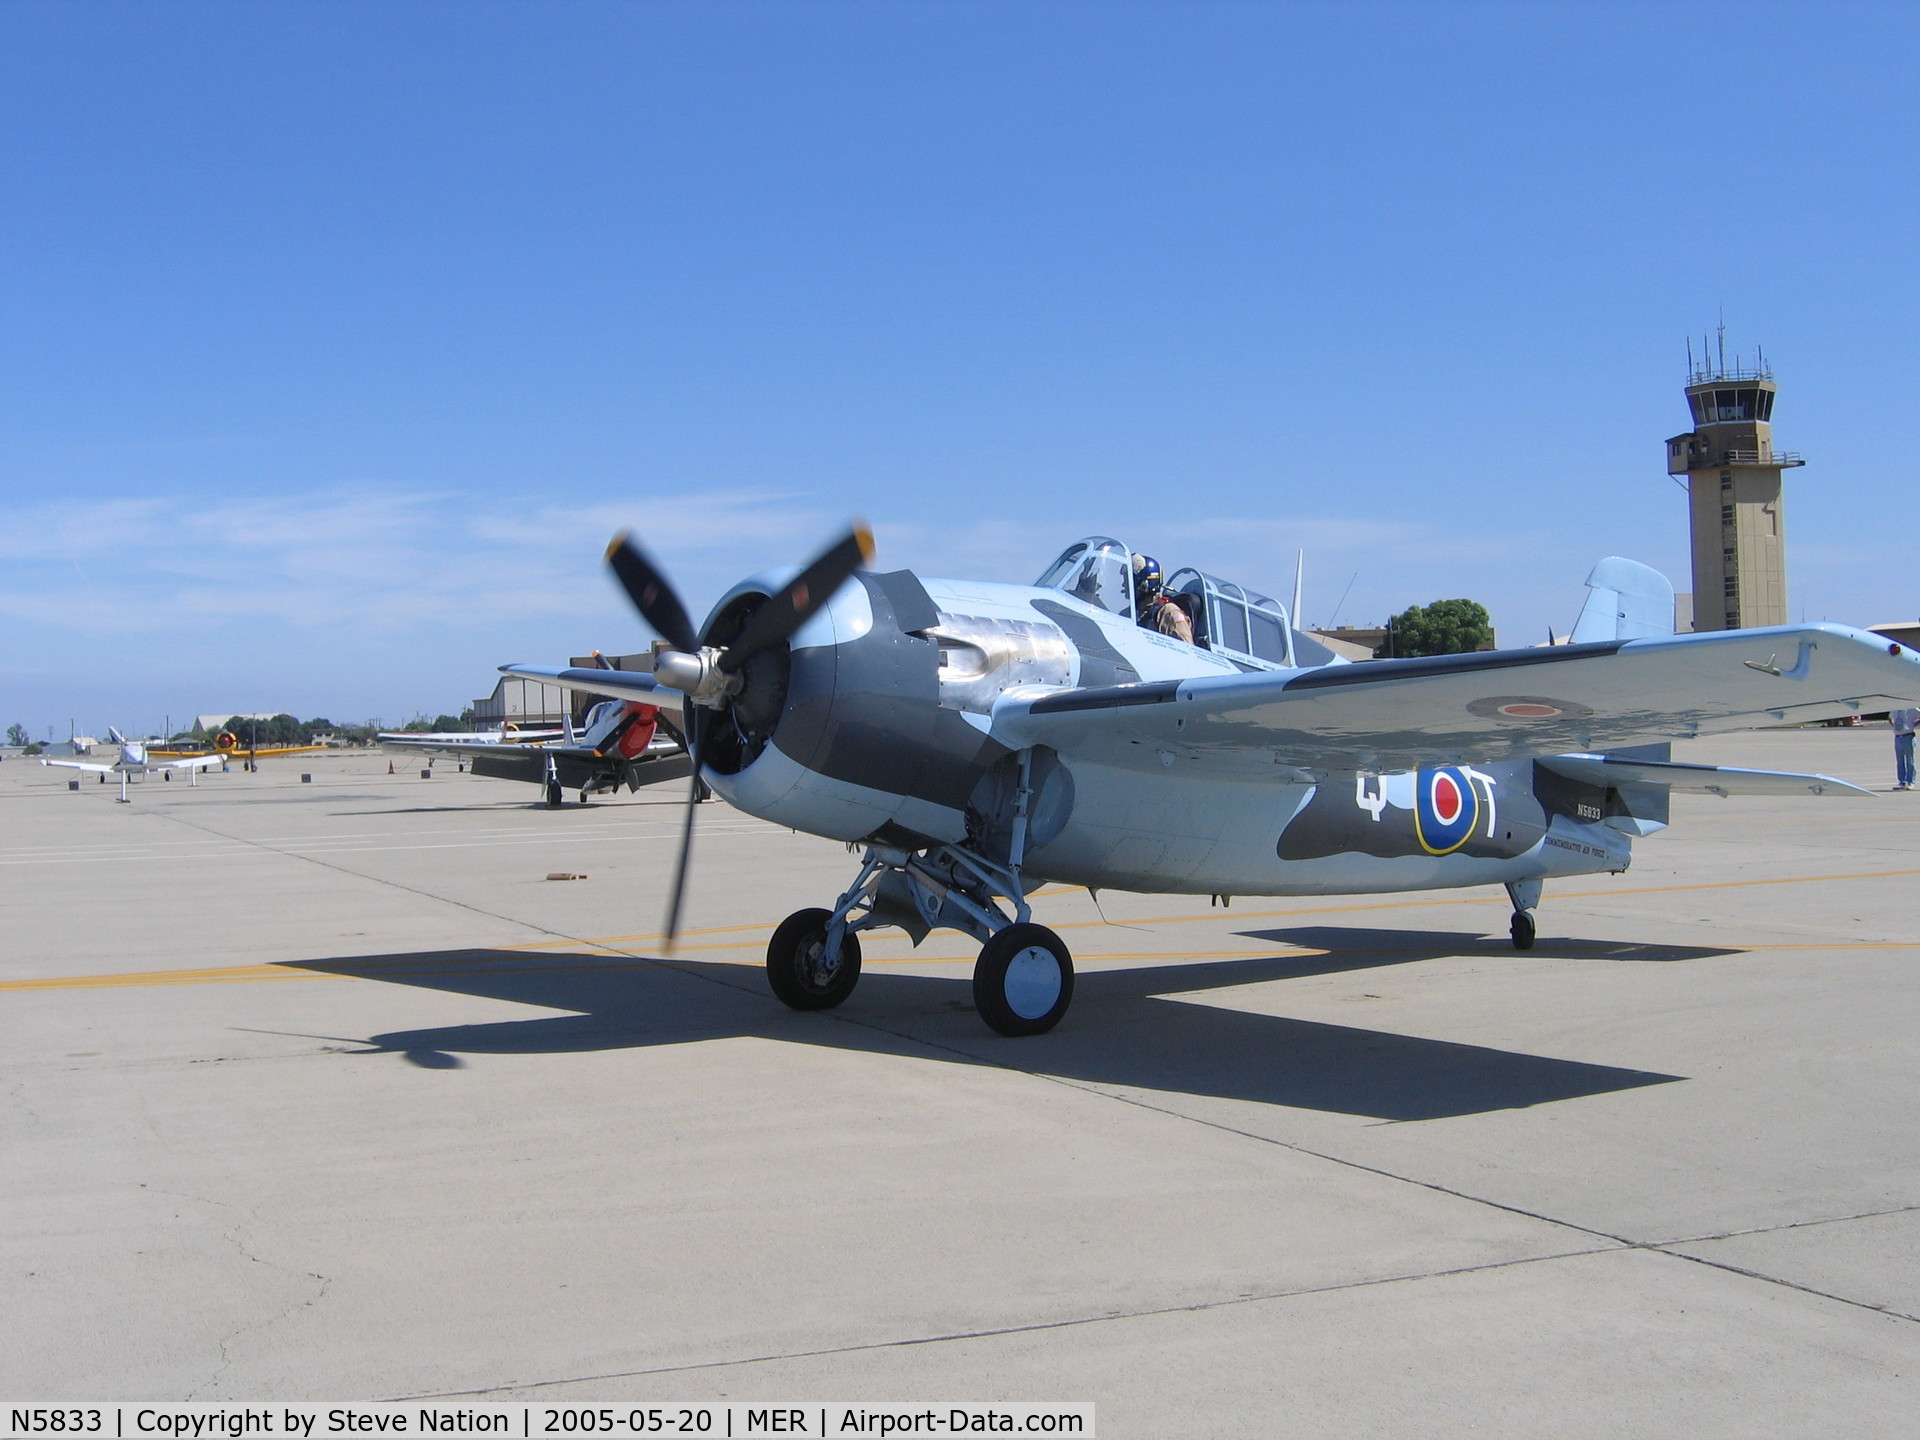 N5833, 1945 General Motors (Grumman) FM-2 Wildcat C/N 5833, Commemorative AF FM-2 painted in Royal Navy colors taxying at West Coast Formation Clinic